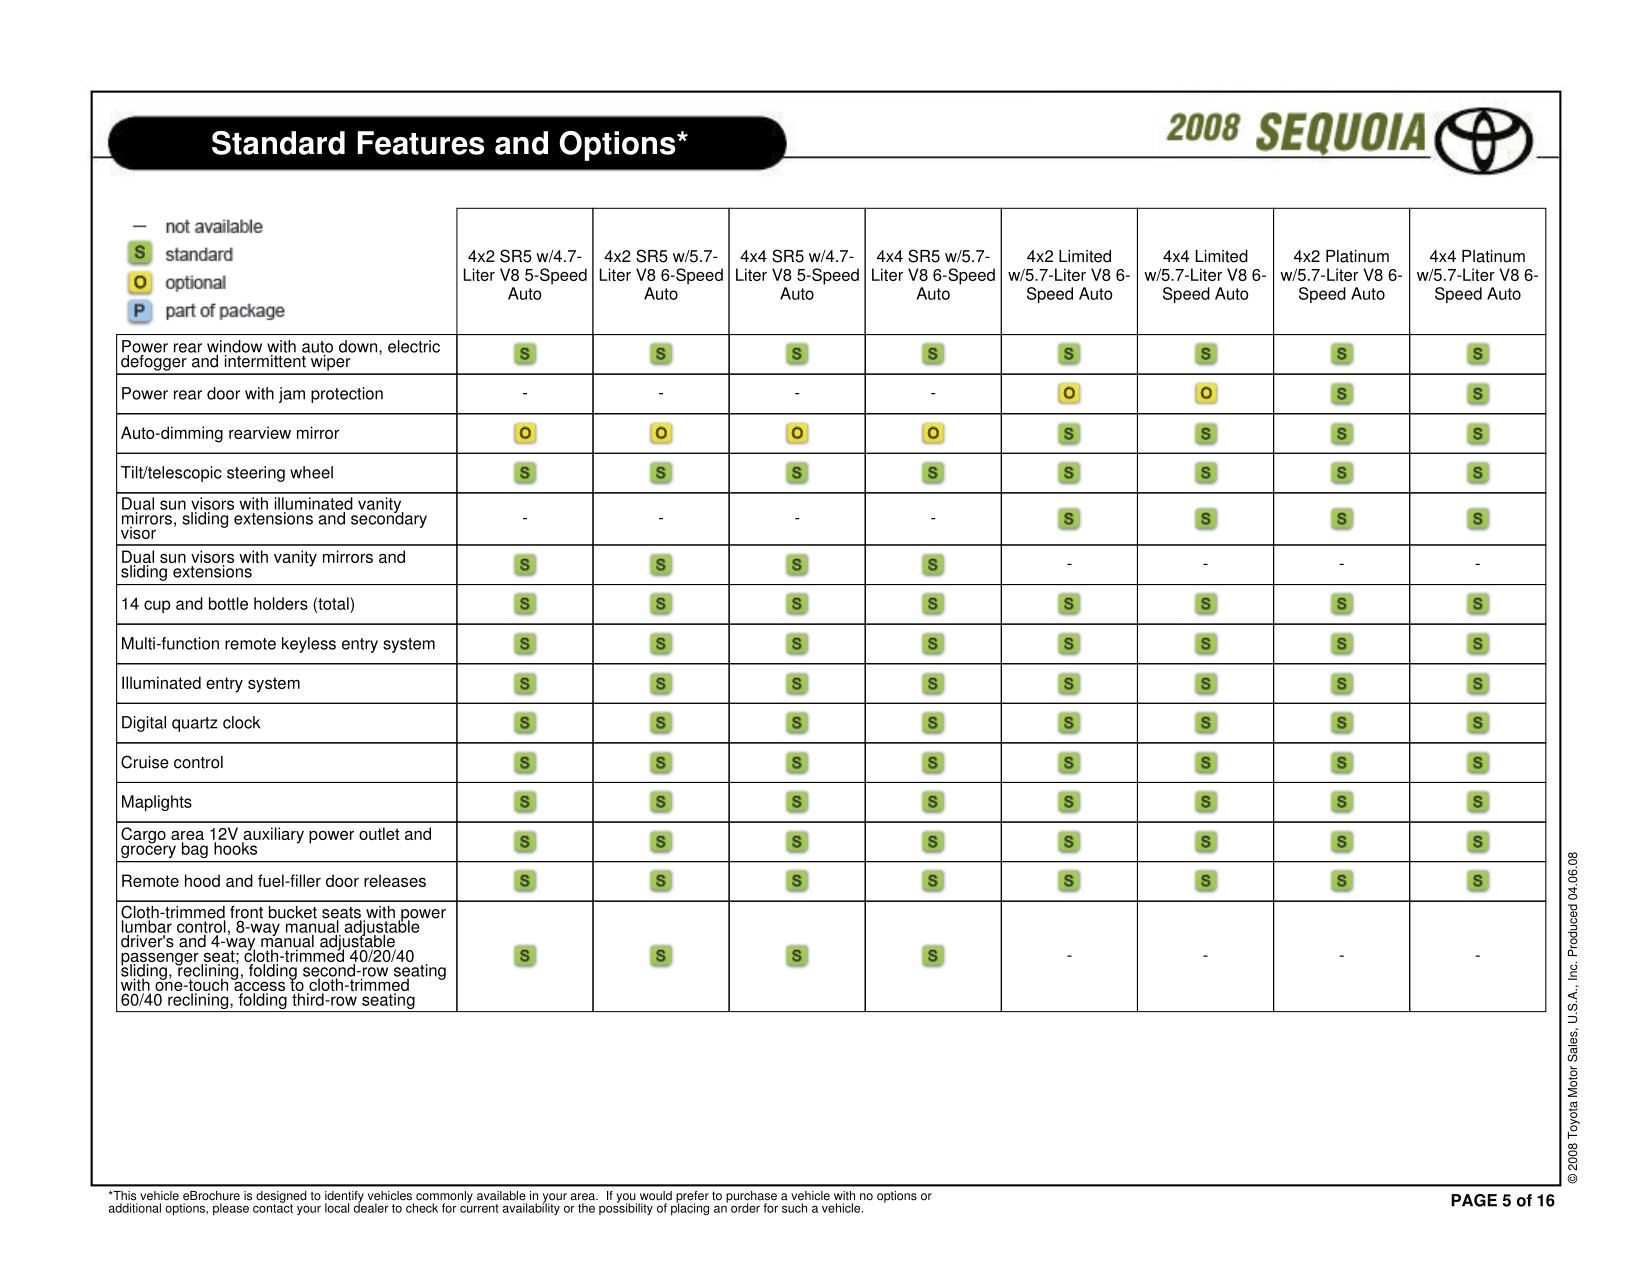 2009 Toyota Sequoia Brochure Page 3